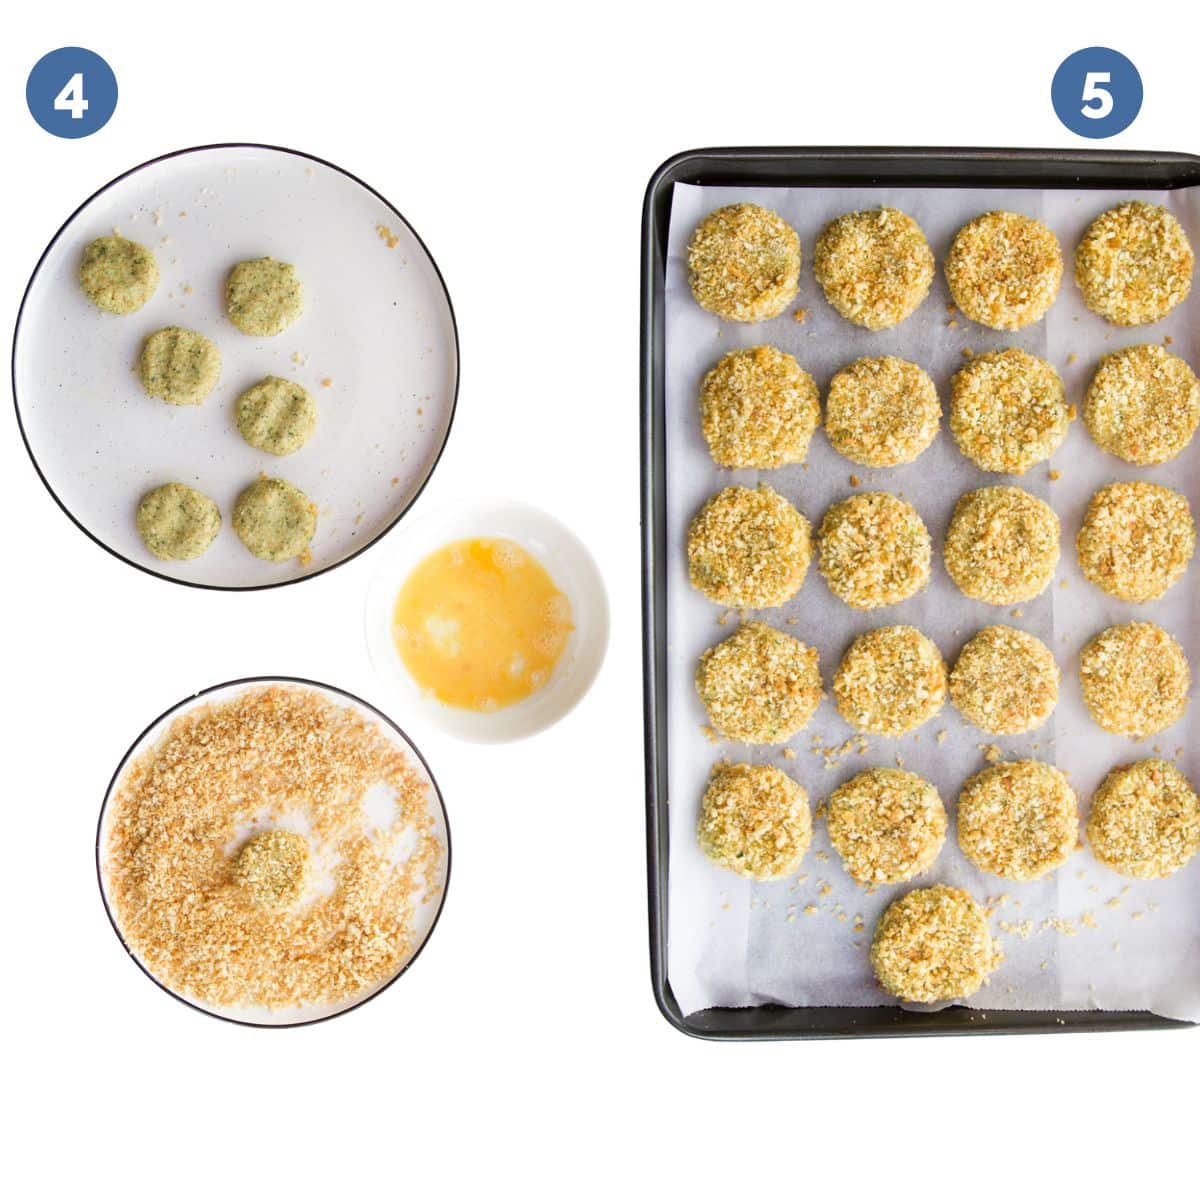 Image Showing Set Up for Breadcrumb Coating Nuggets. 1) Nuggets formed on Plate, 2)Egg Dip, 3)Breadcrumbs of Plate 4)Formed Nuggets on Baking Tray.